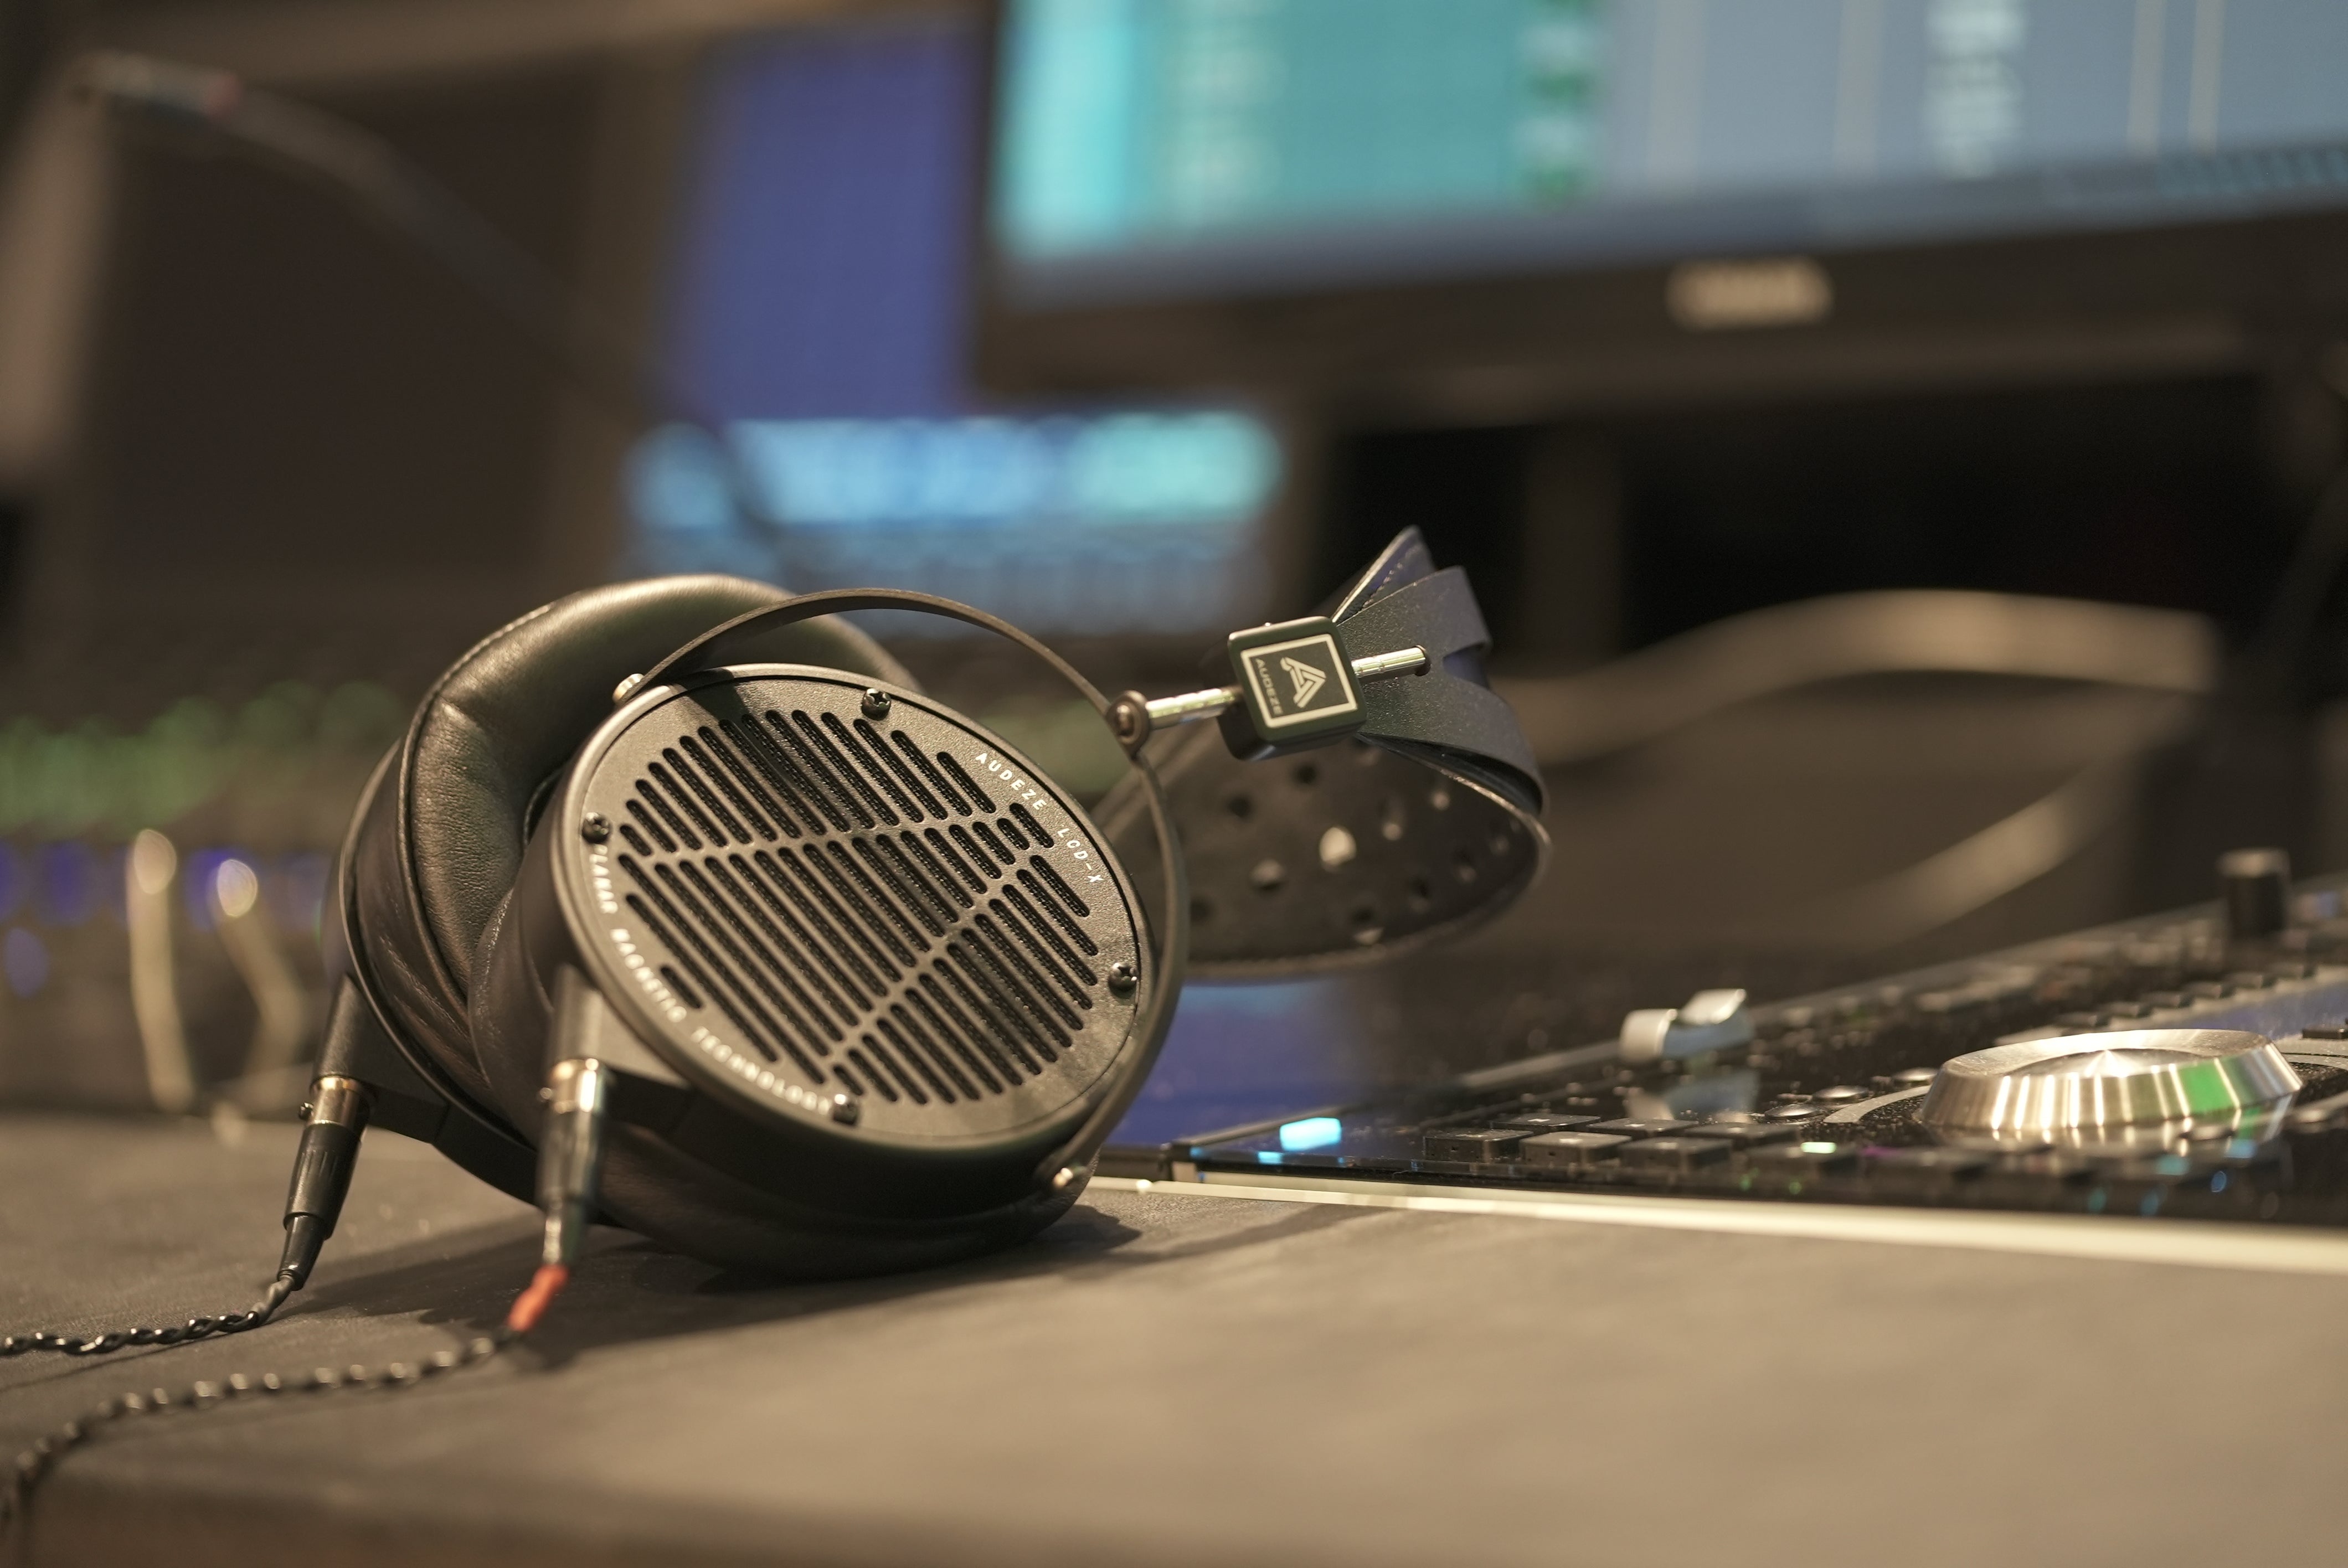 Audeze LCD-X Headphones laying on mixing table